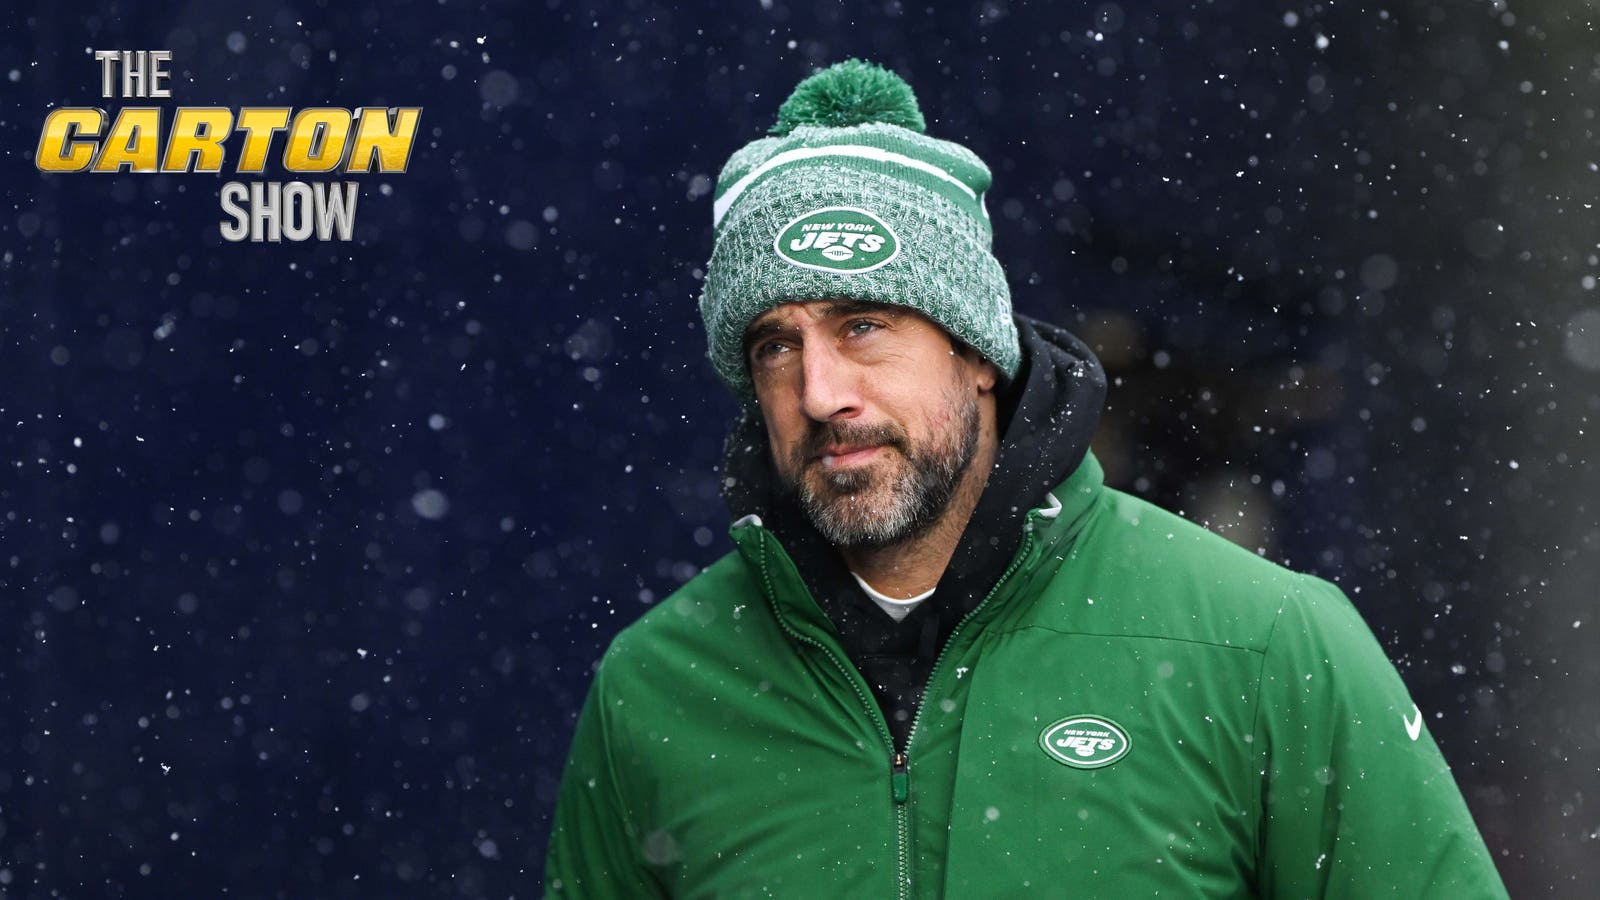 How many distractions can Aaron Rodgers cause for the Jets?